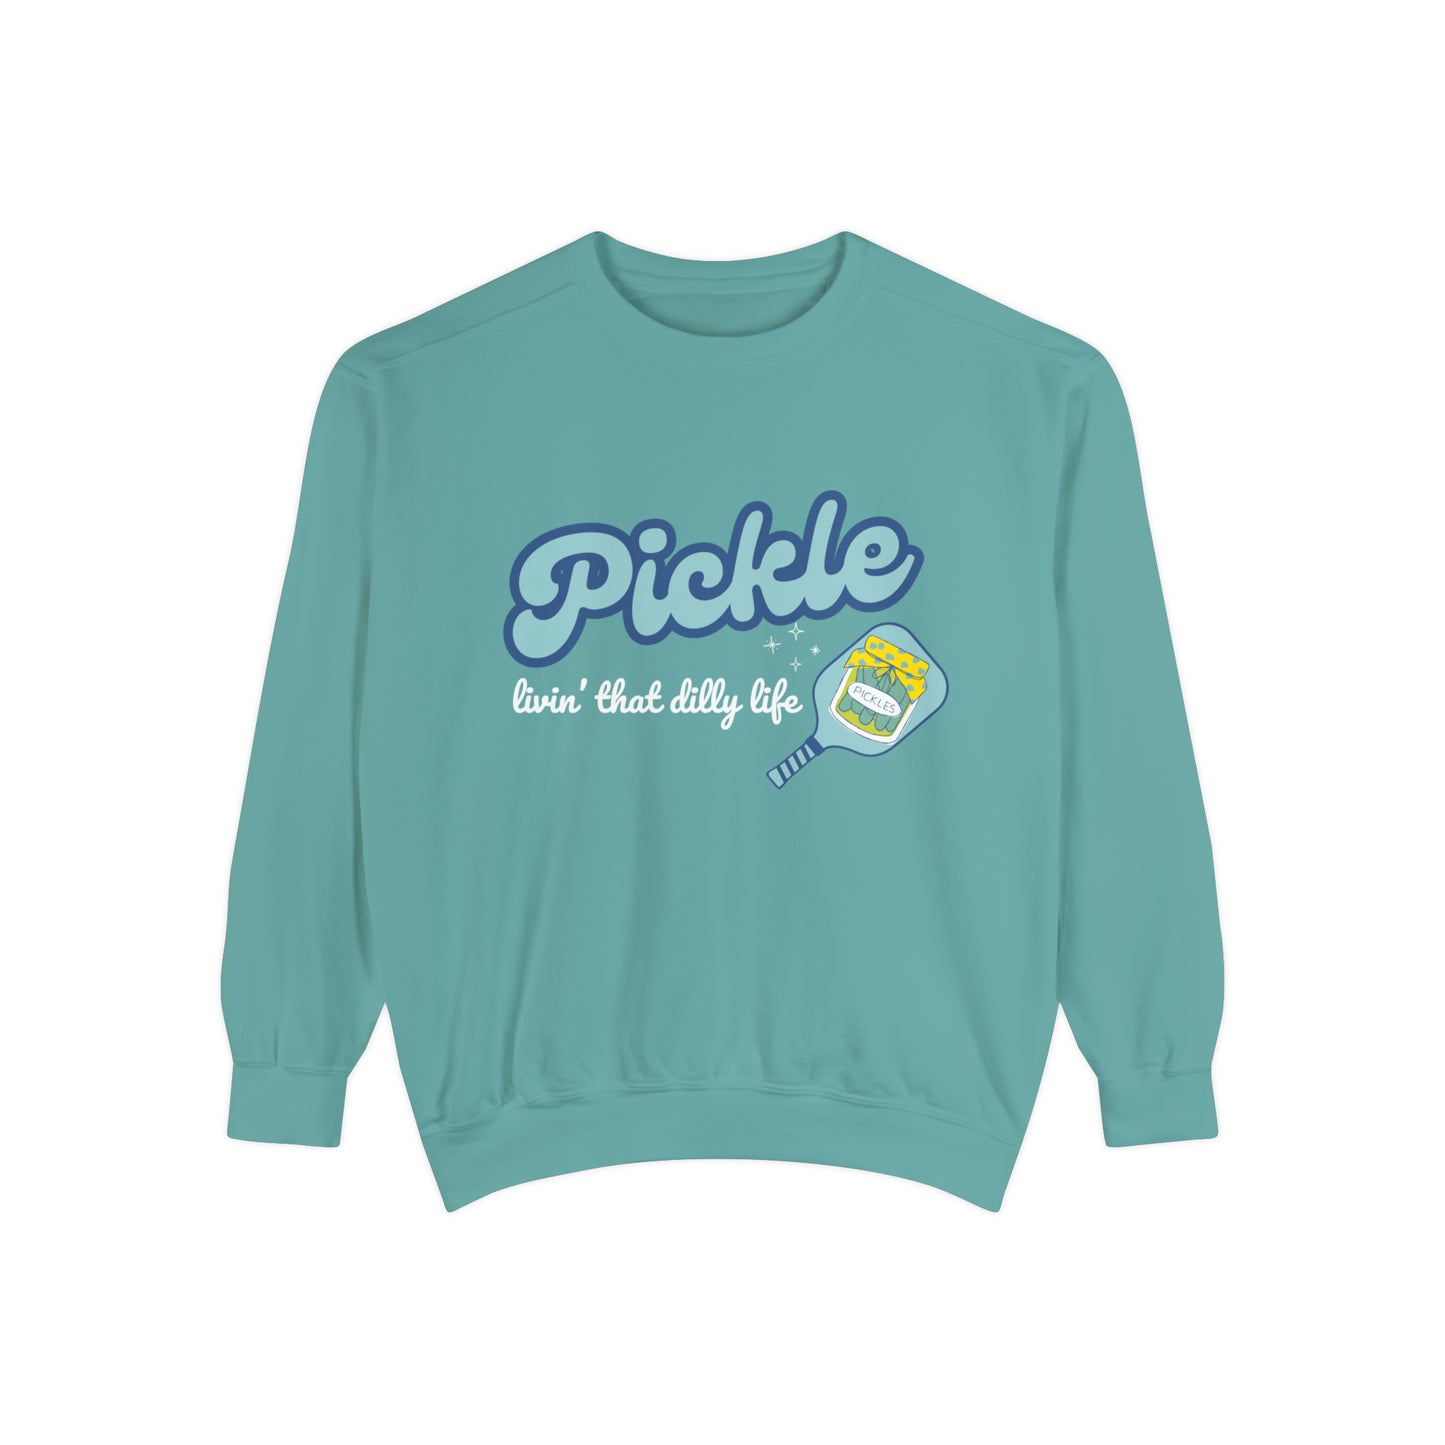 Livin’ that Dilly Life. Dill Pickle Crew - Comfort Colors